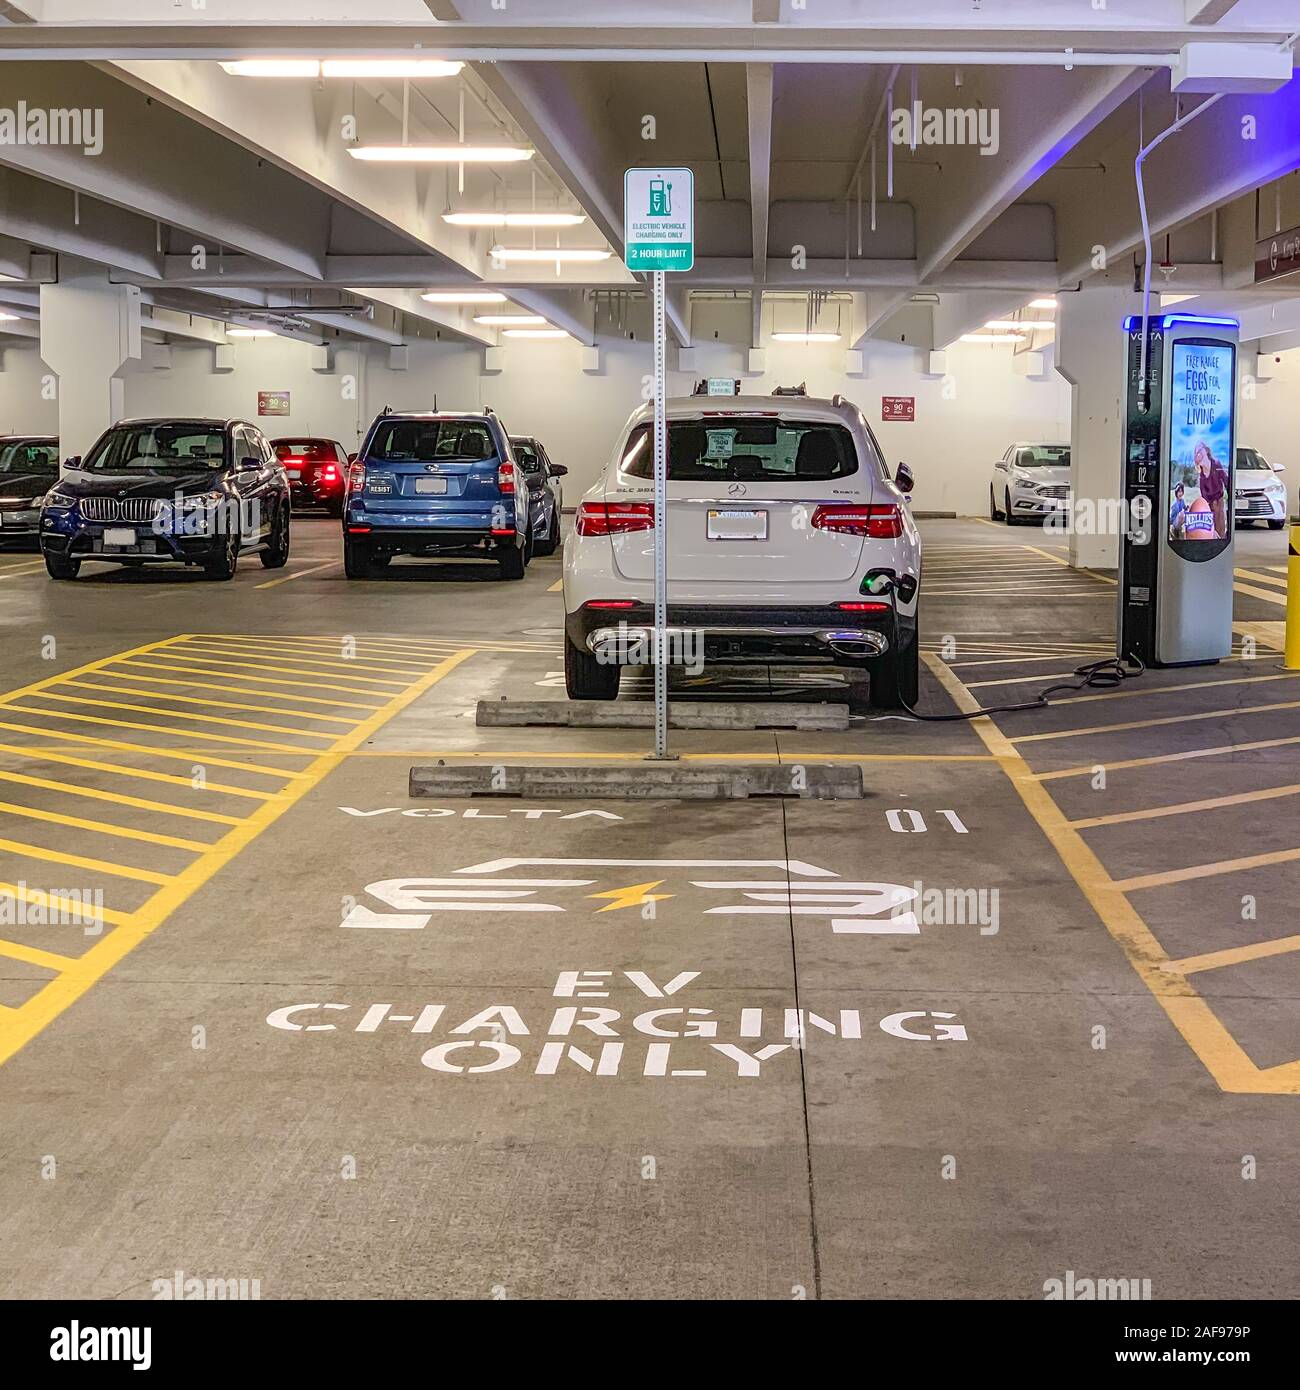 Electric Vehicle Charging Battery in Grocery Store Parking Garage.  Alexandria, Virginia, USA. Stock Photo